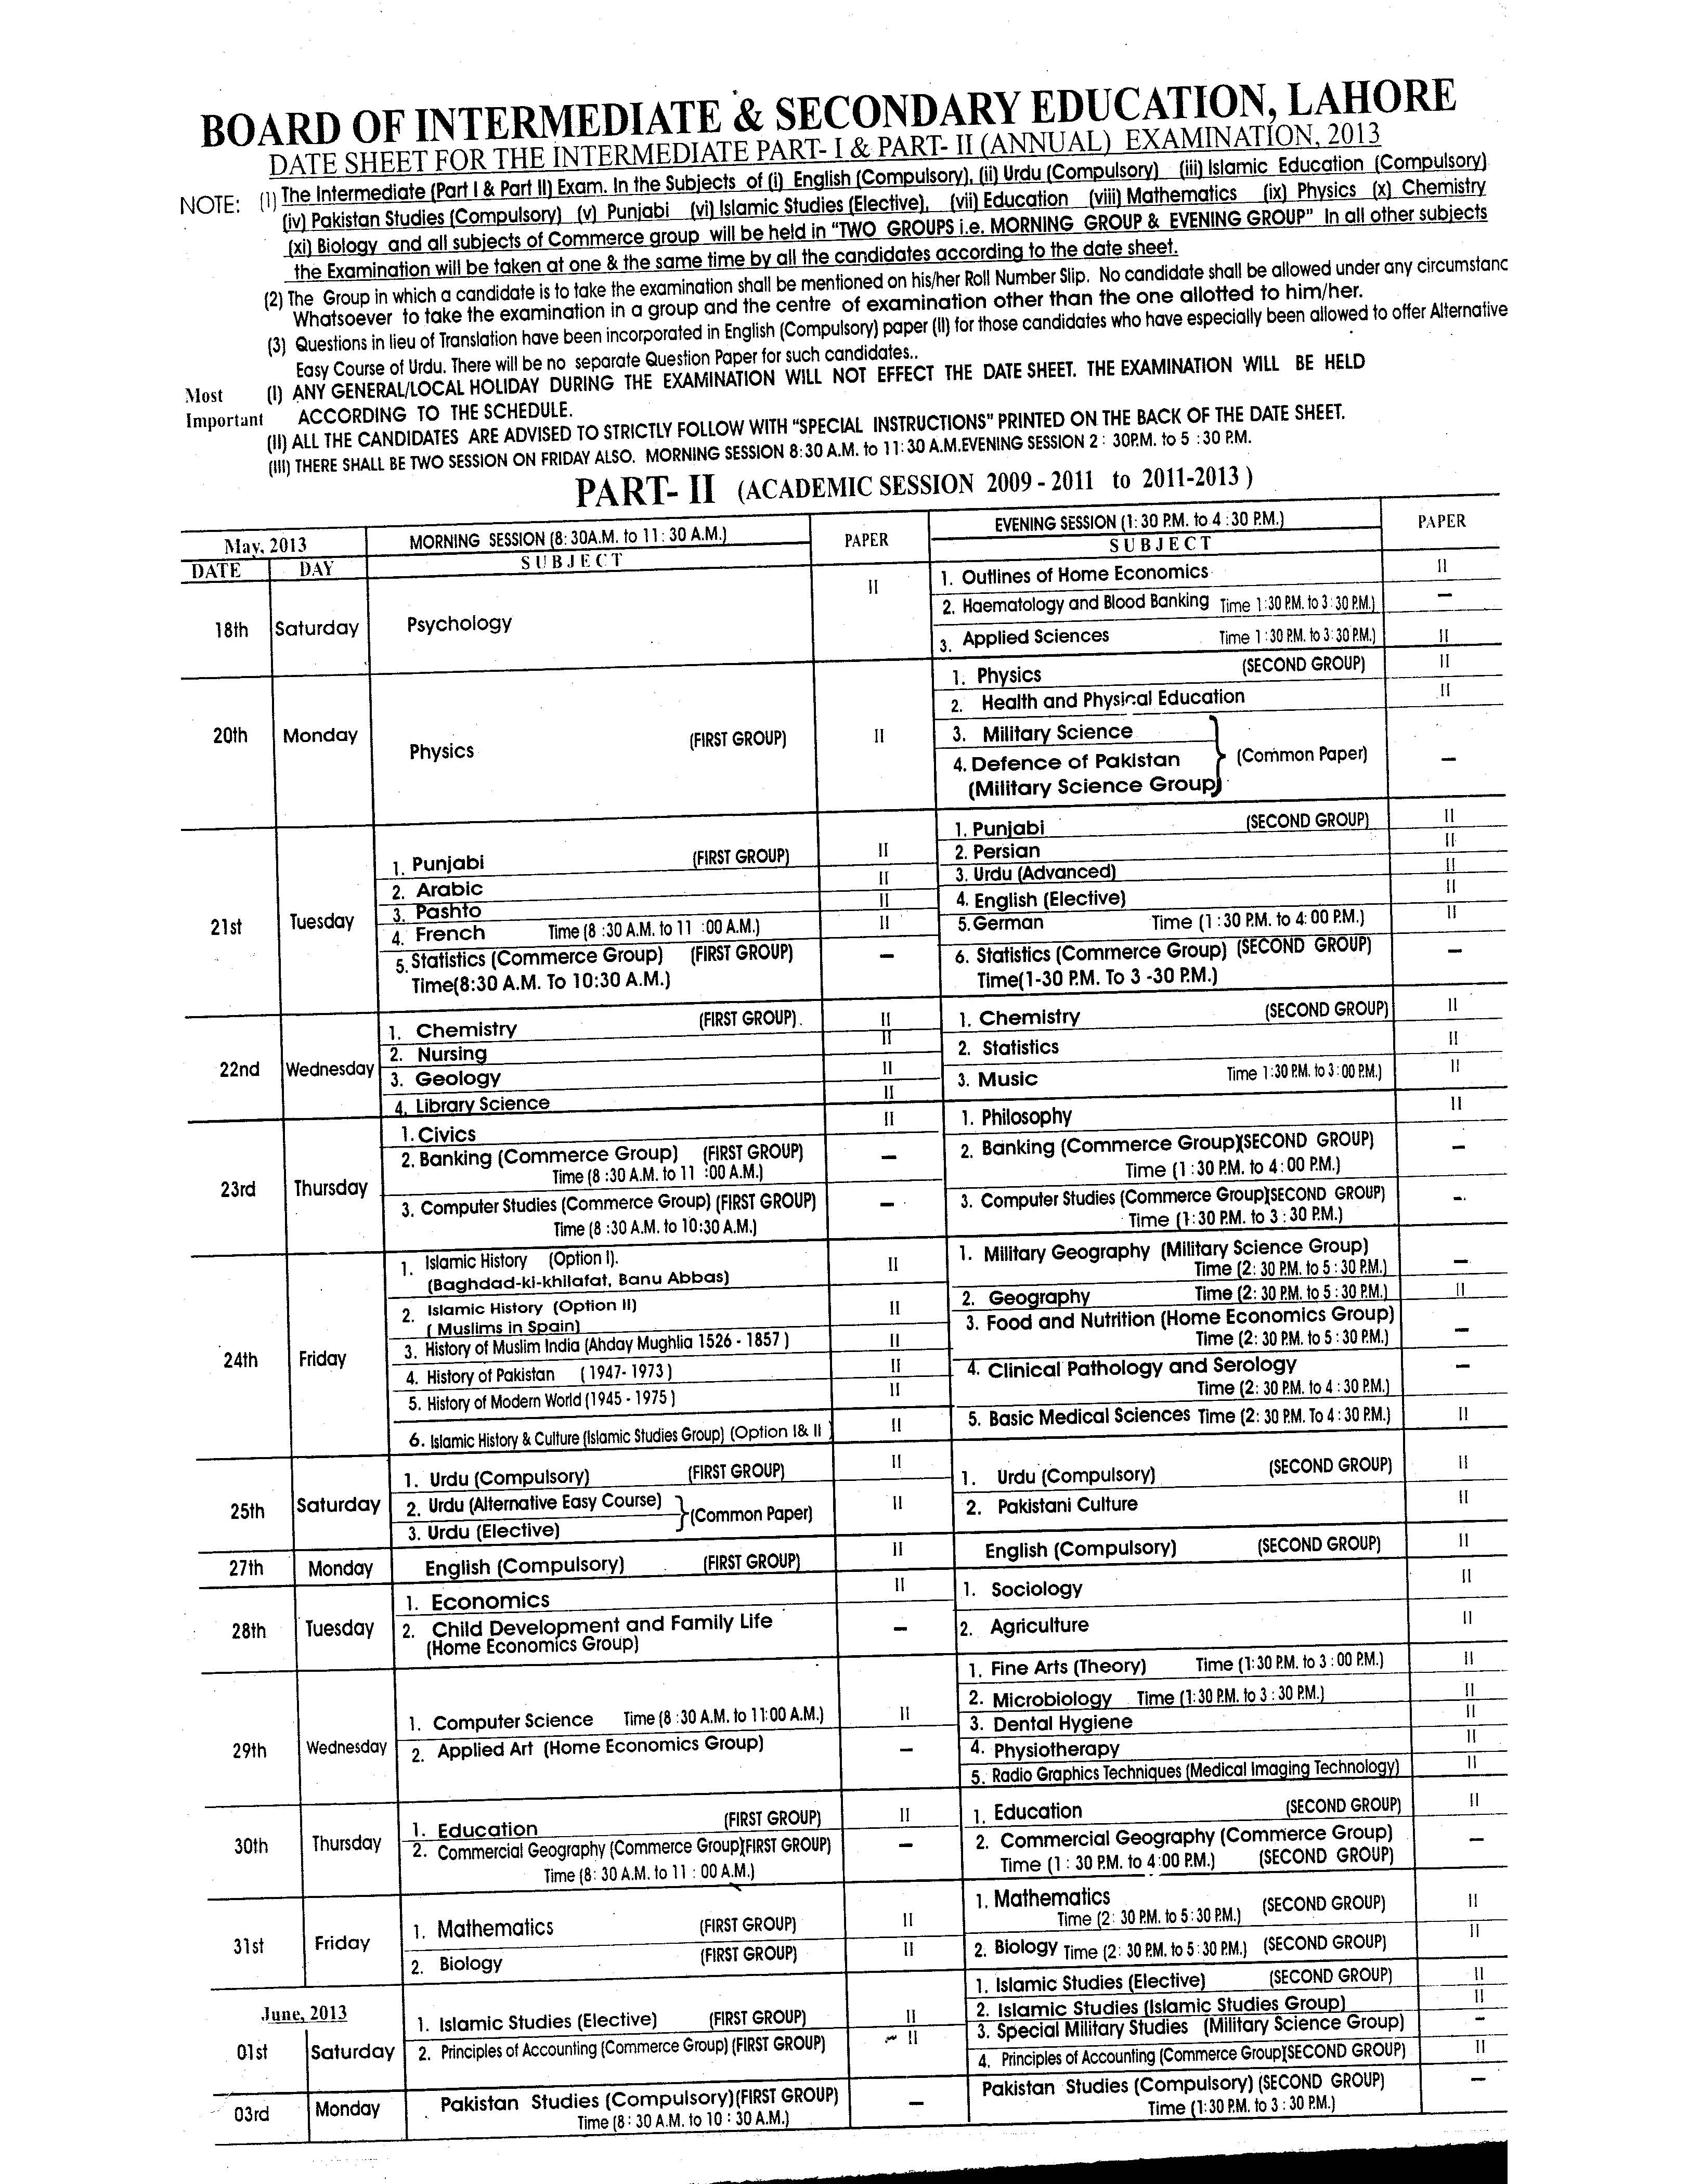 BISE Lahore announced Inter examination date sheet 2016